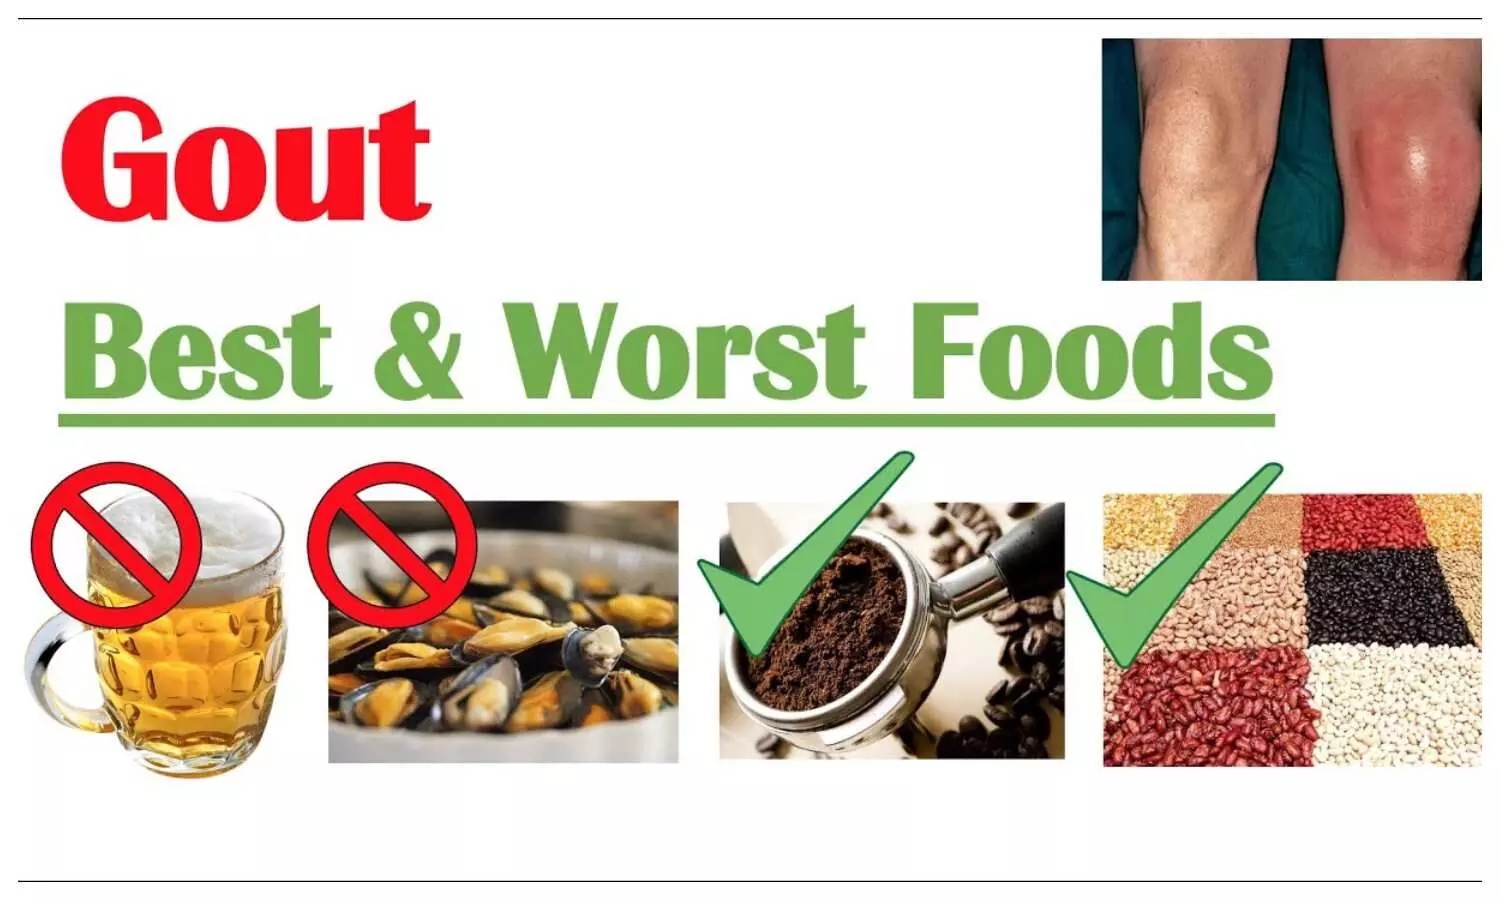 Foods to Avoid in Gout